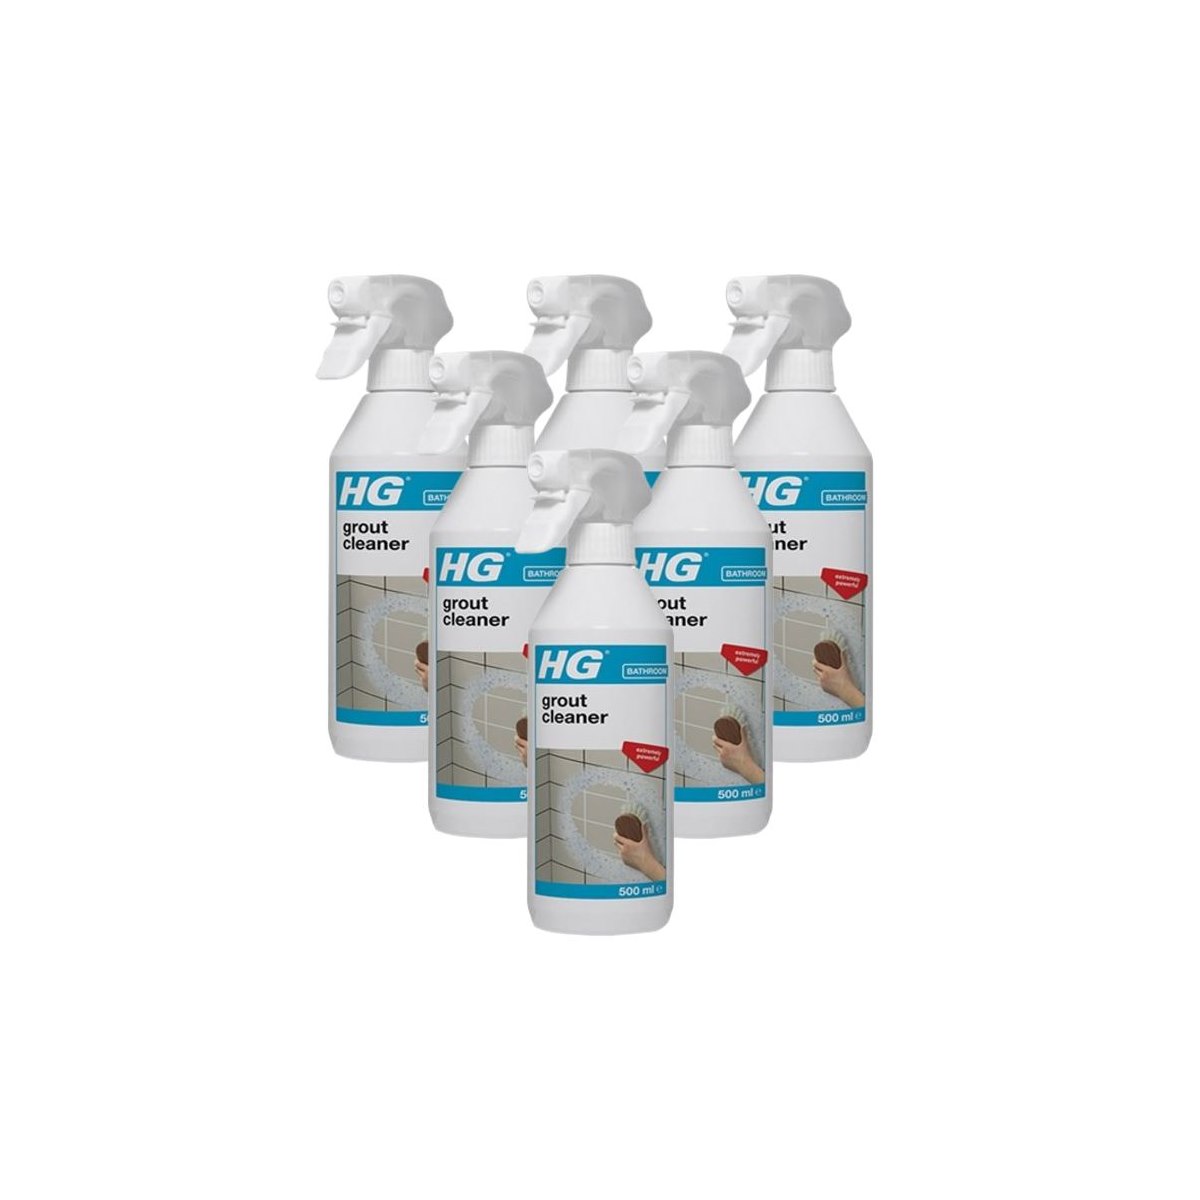 Case 6x HG Grout Cleaner 500ml